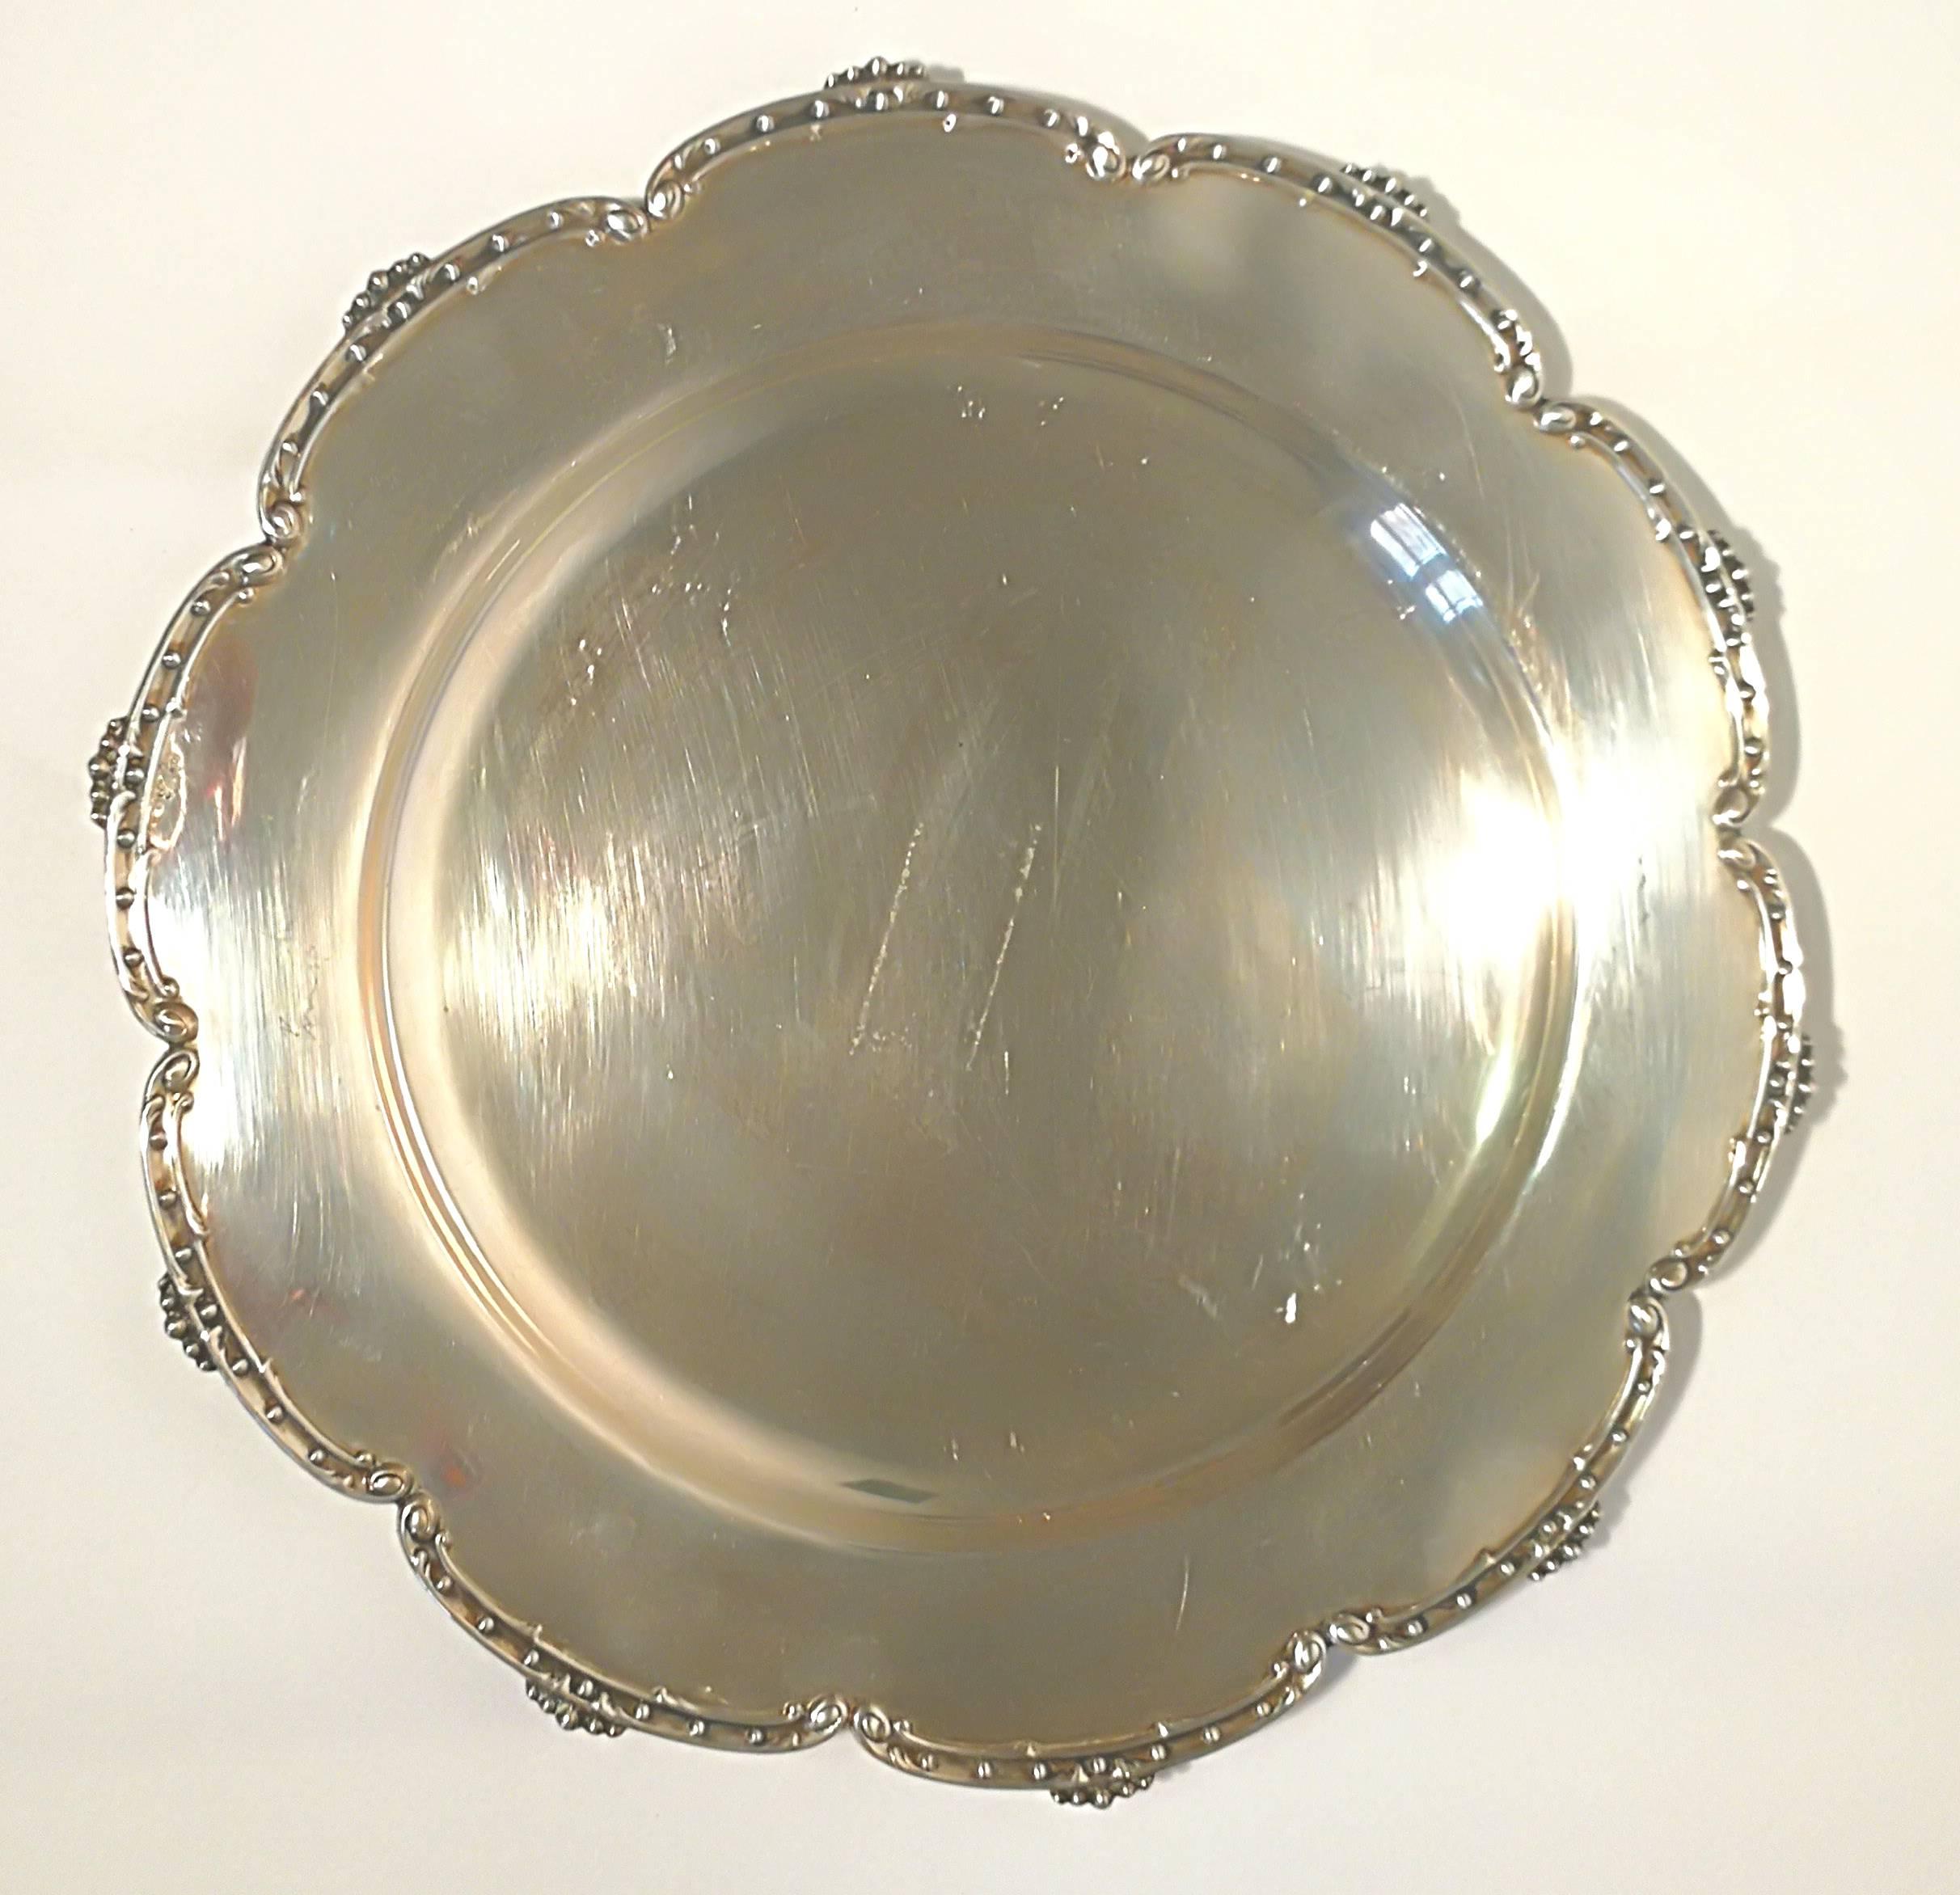 Very nice silver dish plate. With silver decorations.